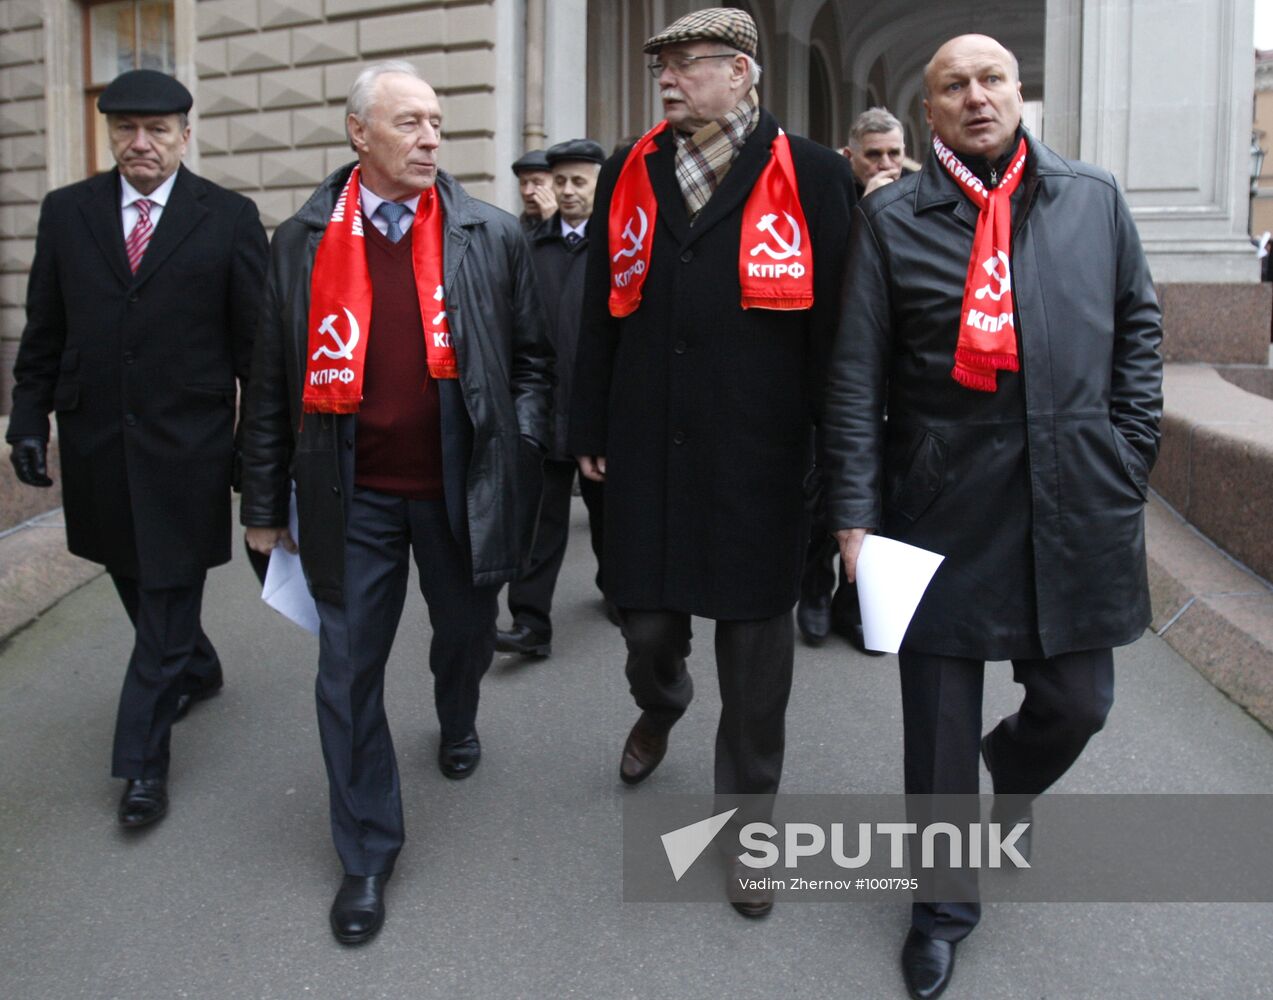 Communist Party meets with voters in St. Petersburg